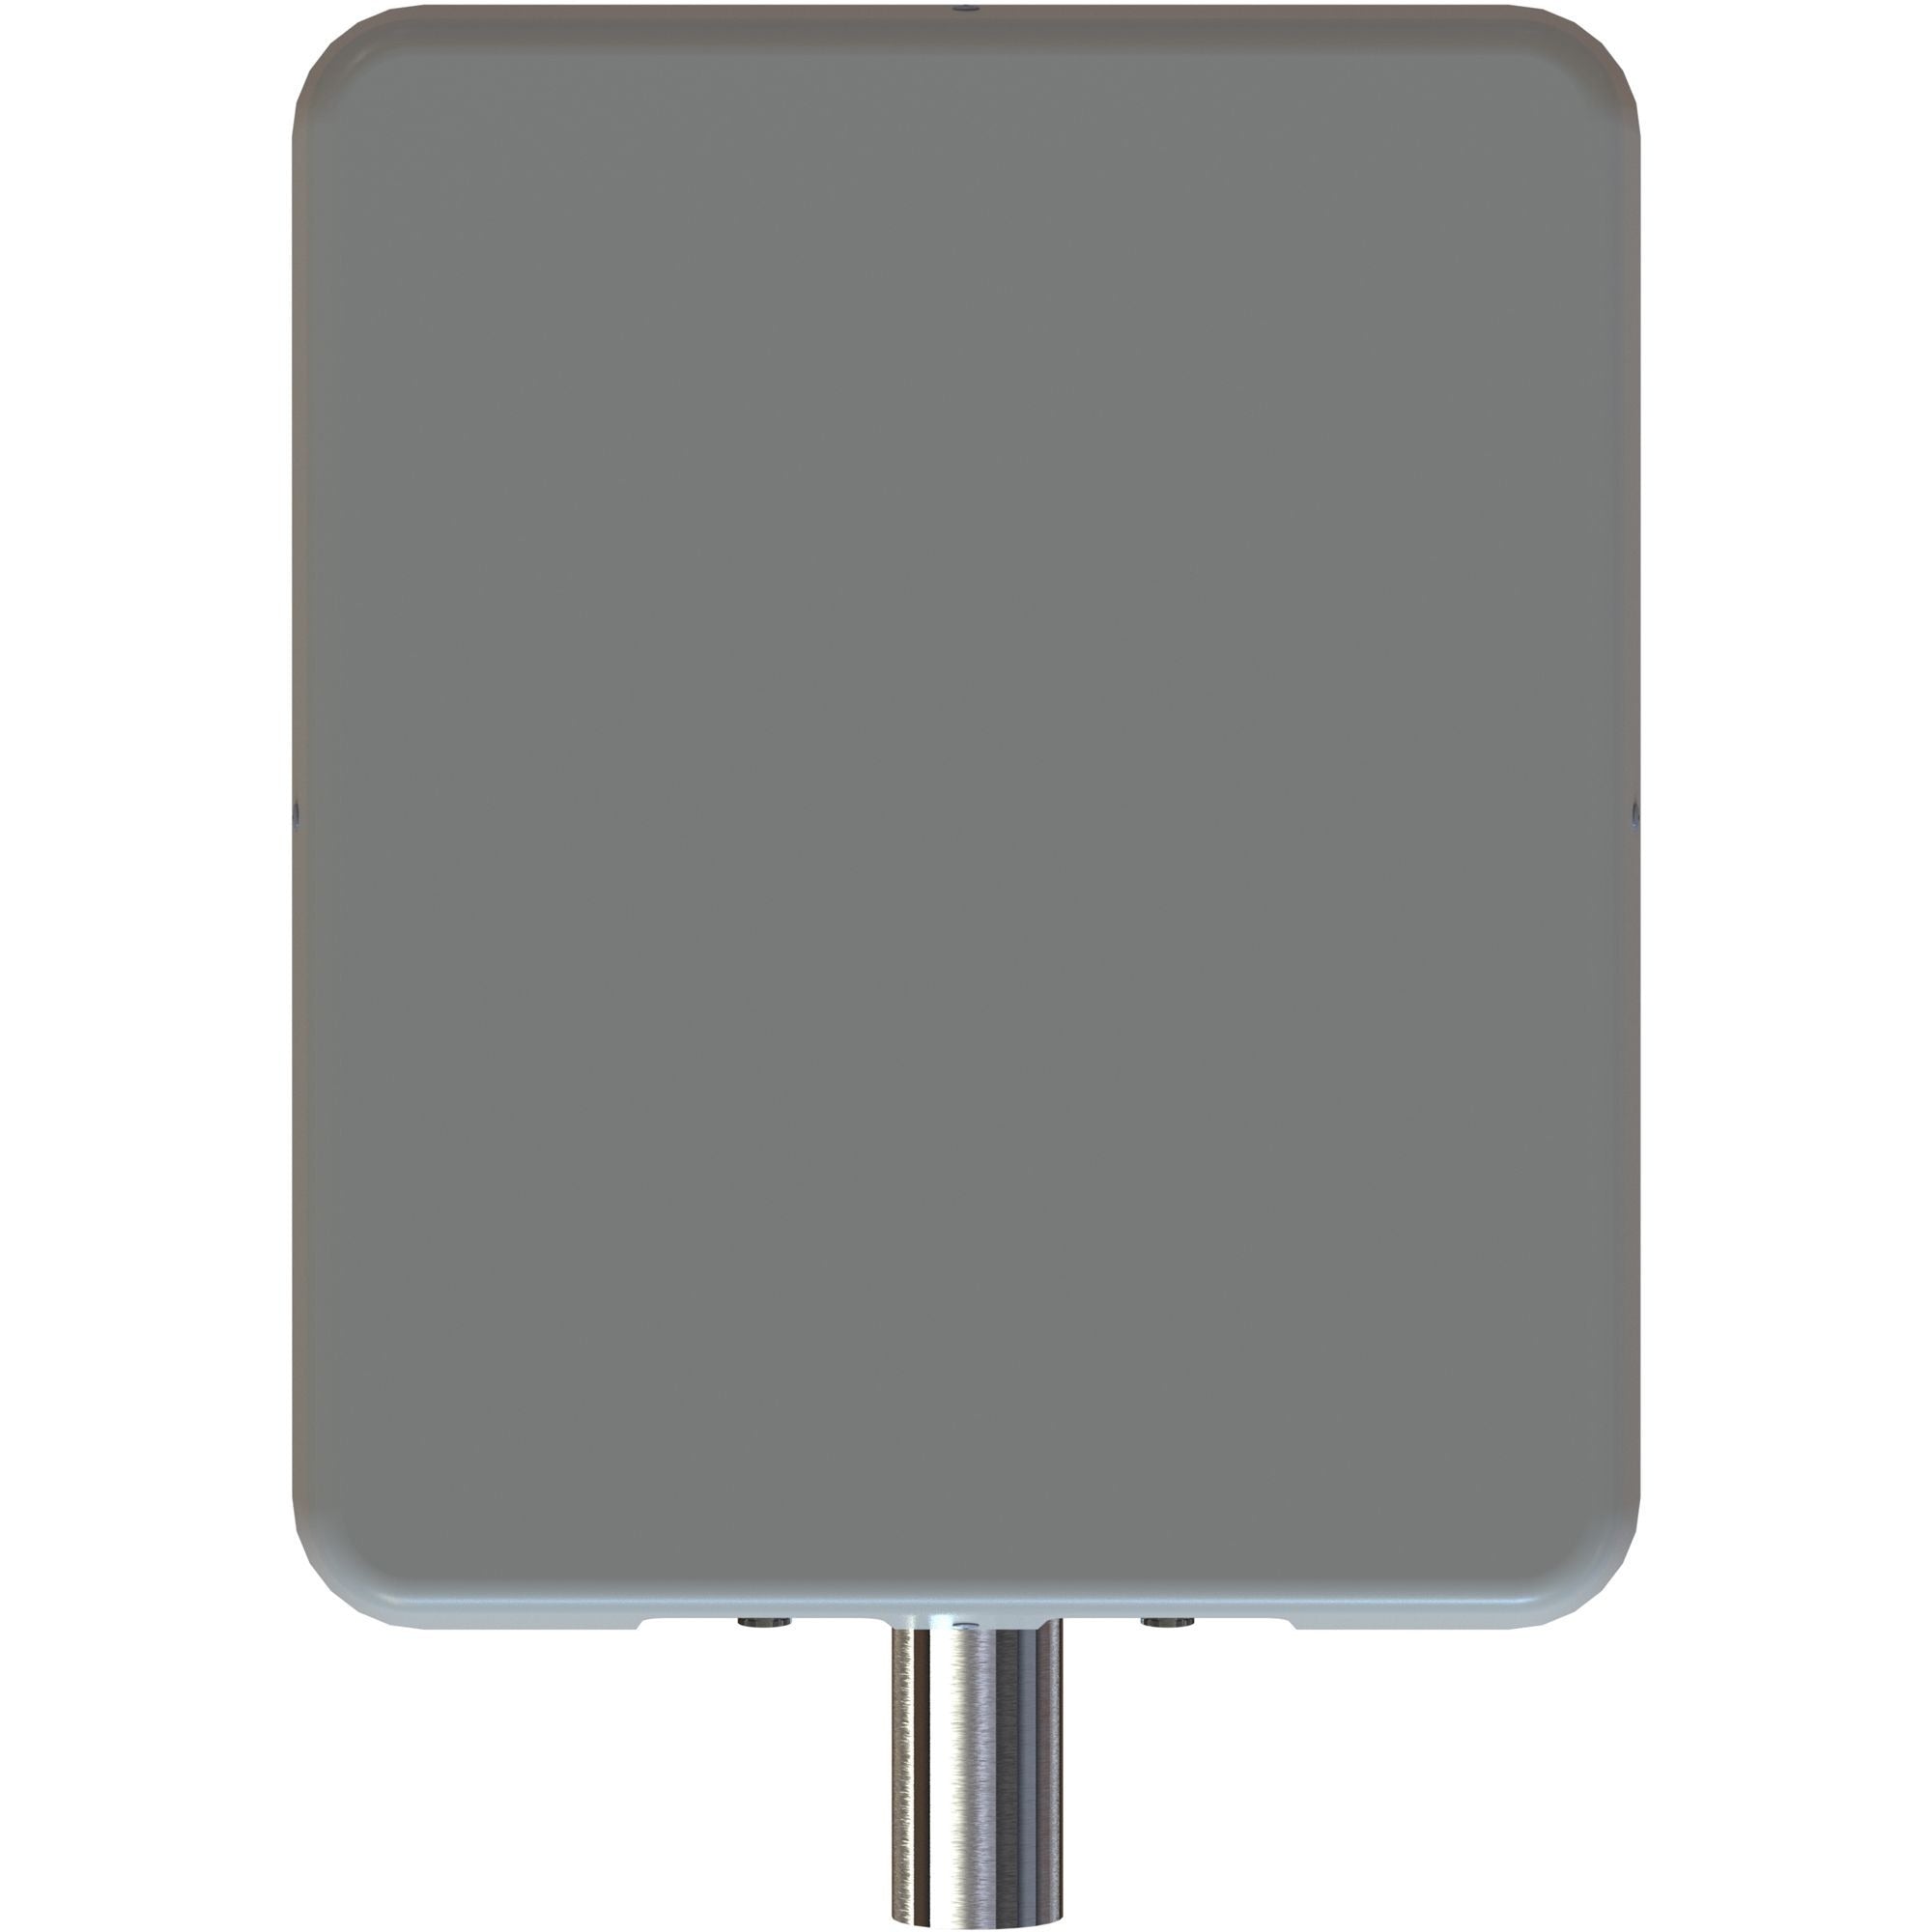 Parsec Great Dane Series - Roof Mount Omnidirectional Antenna - PTAGD2L50